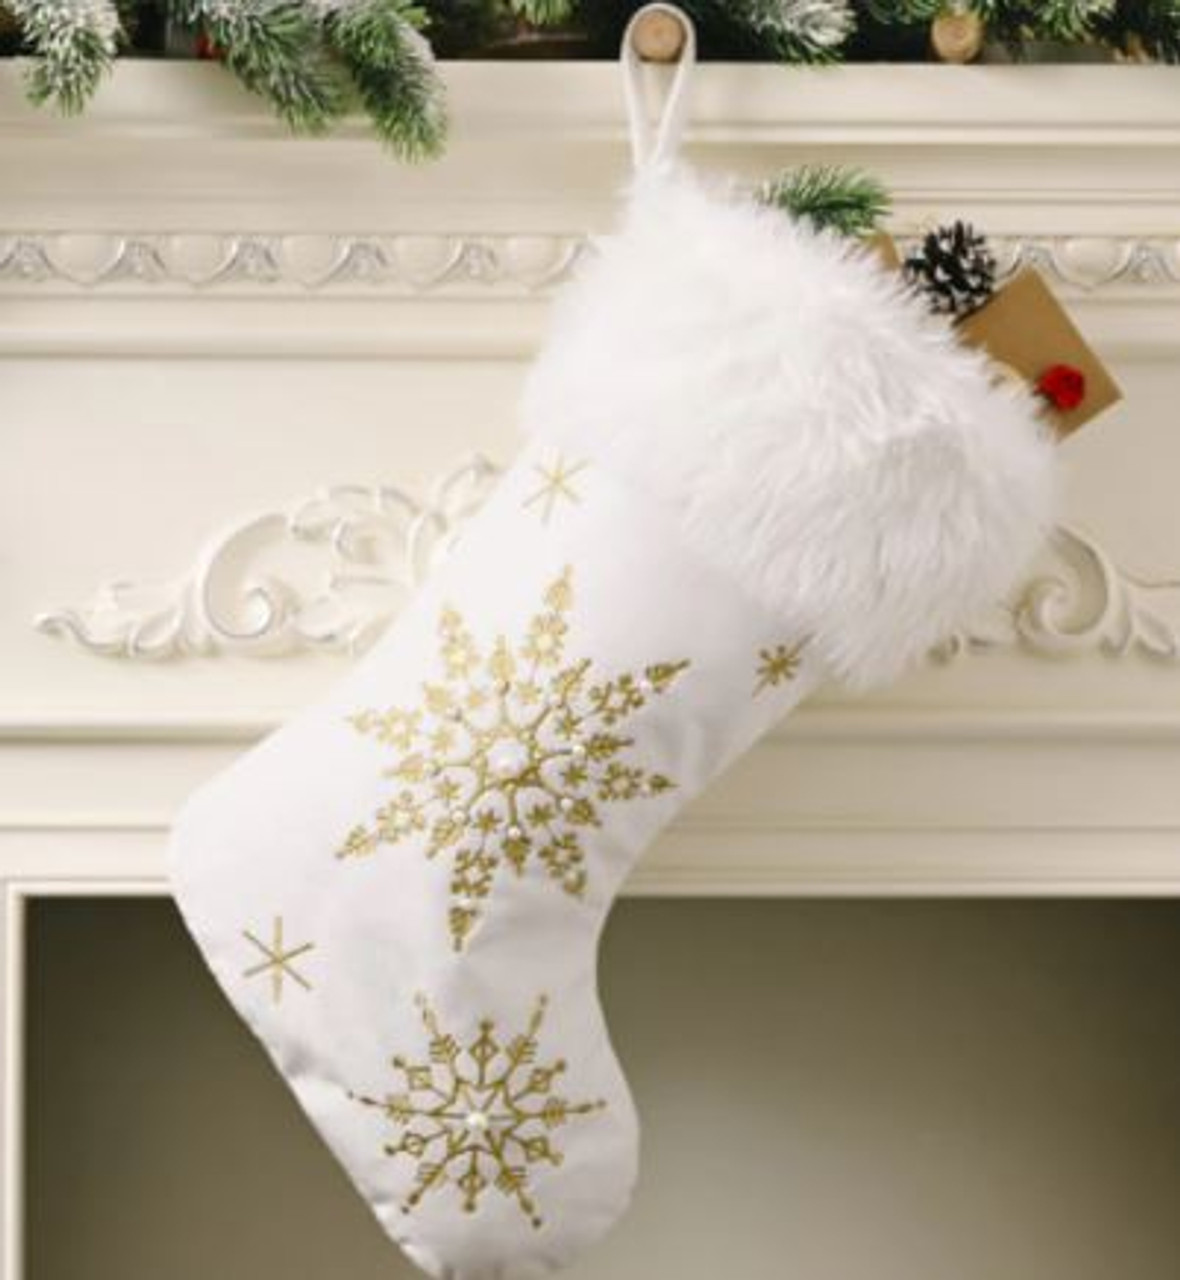 Cream Stocking with Gold Snowflakes